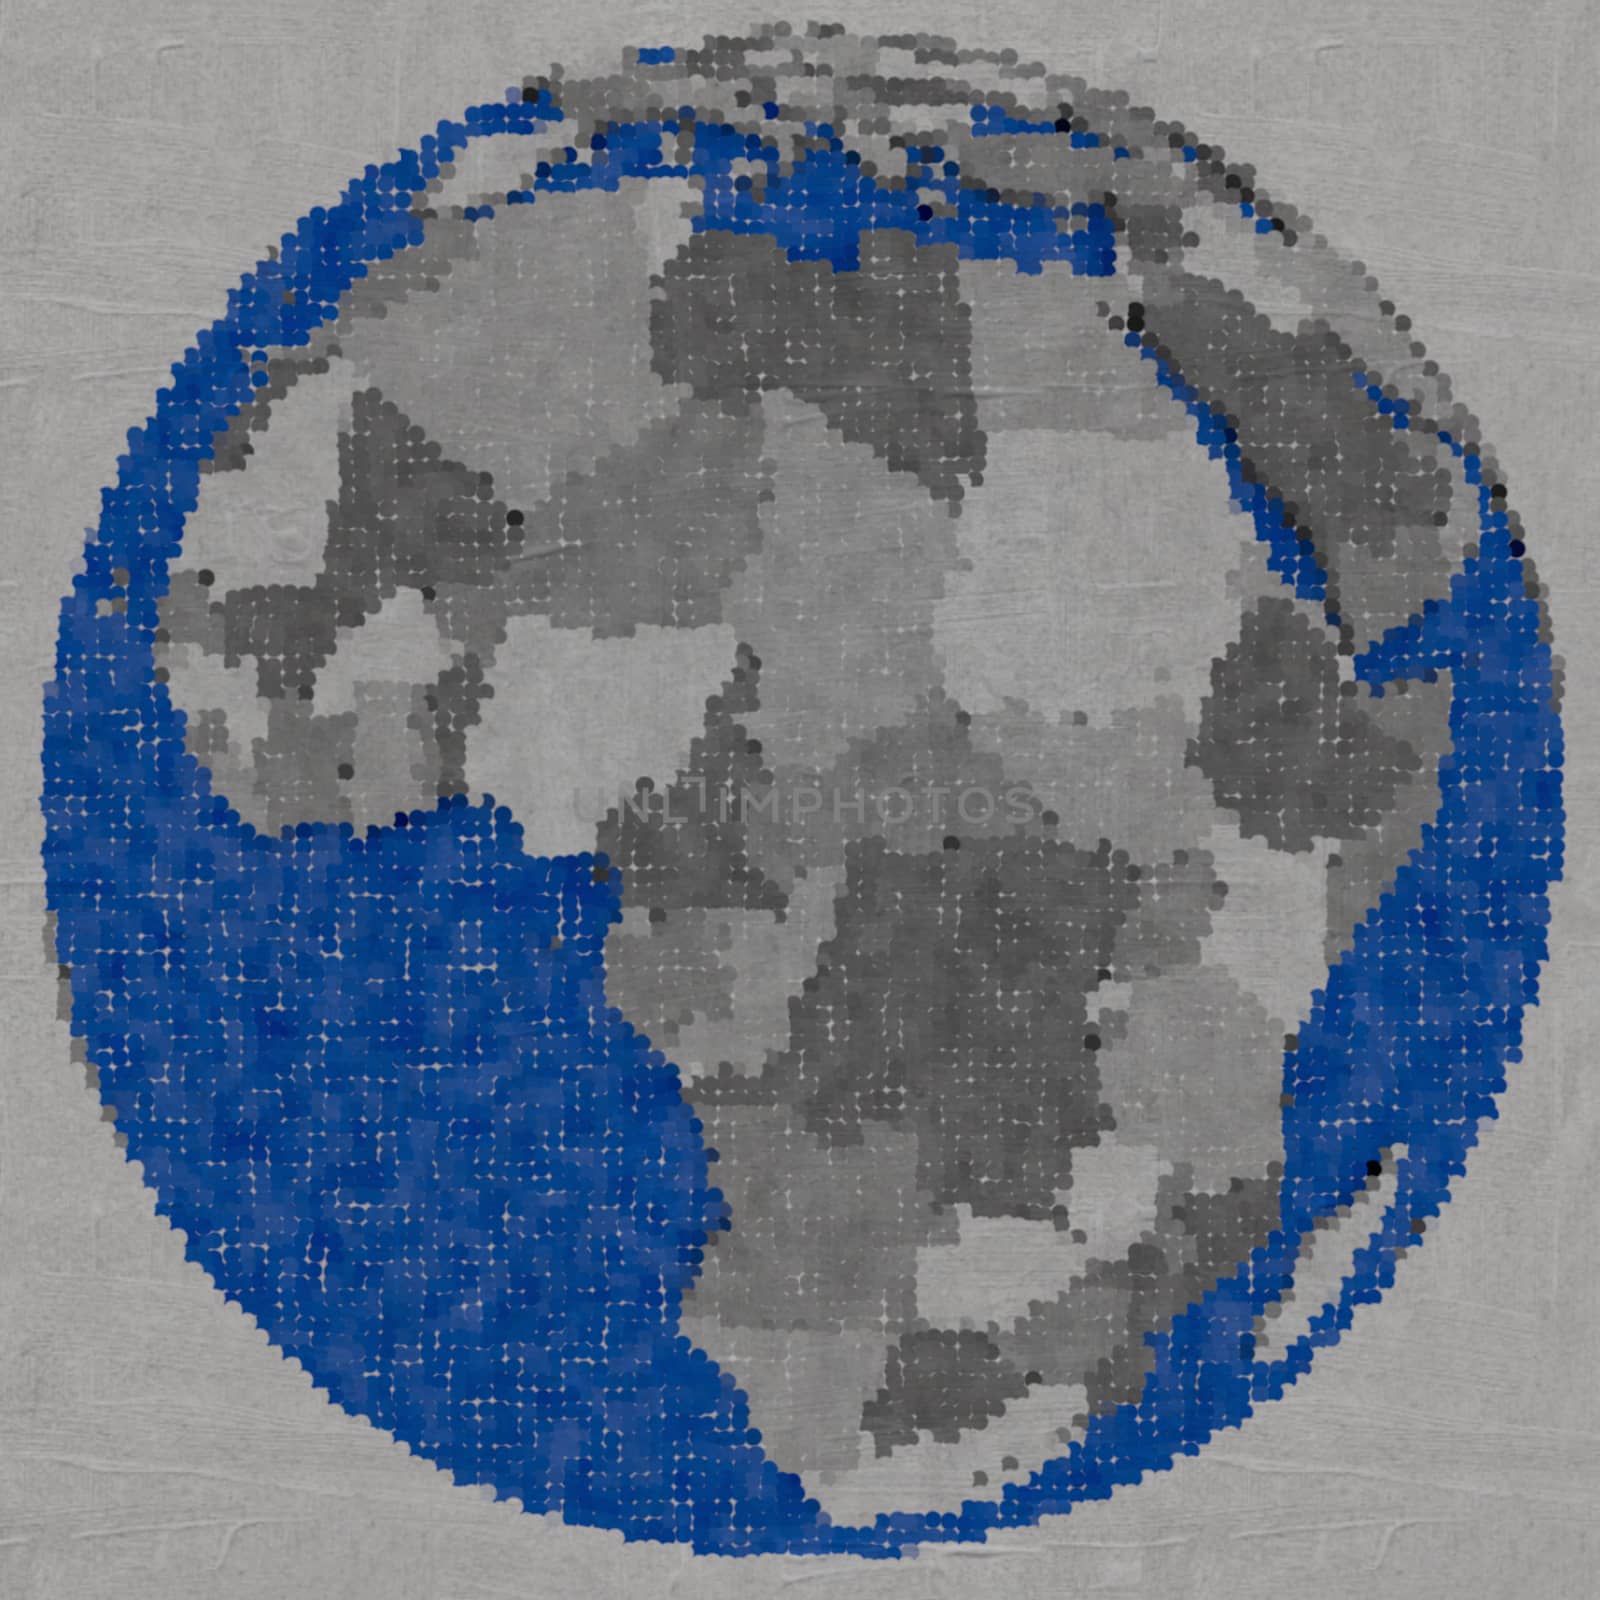 Drawing of Africa on Earth by Harvepino